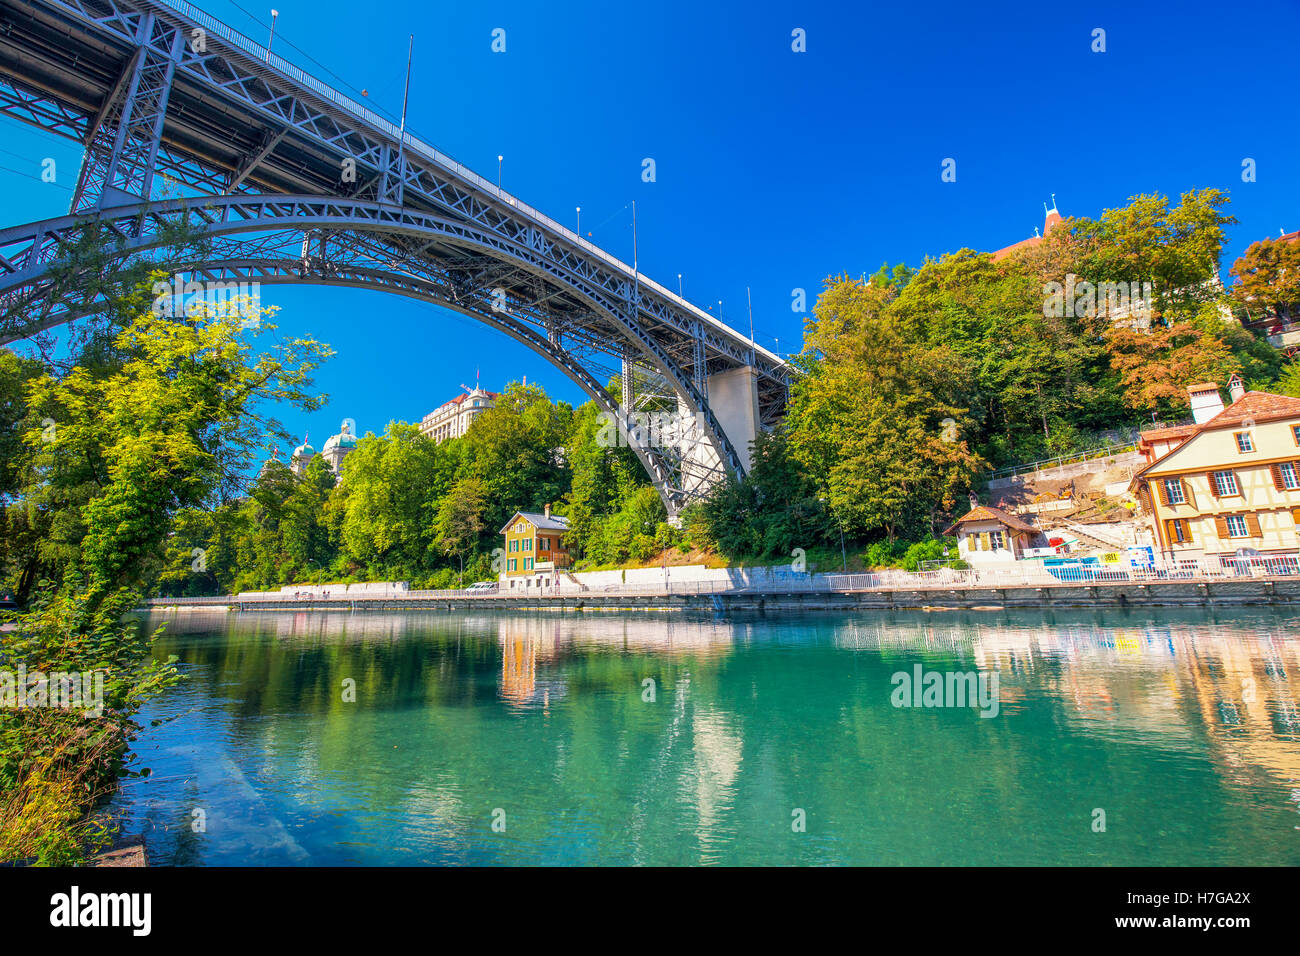 Bridge in old city center of Bern.  Bern is capital of Switzerland and fourth most populous city in Switzerland. Stock Photo